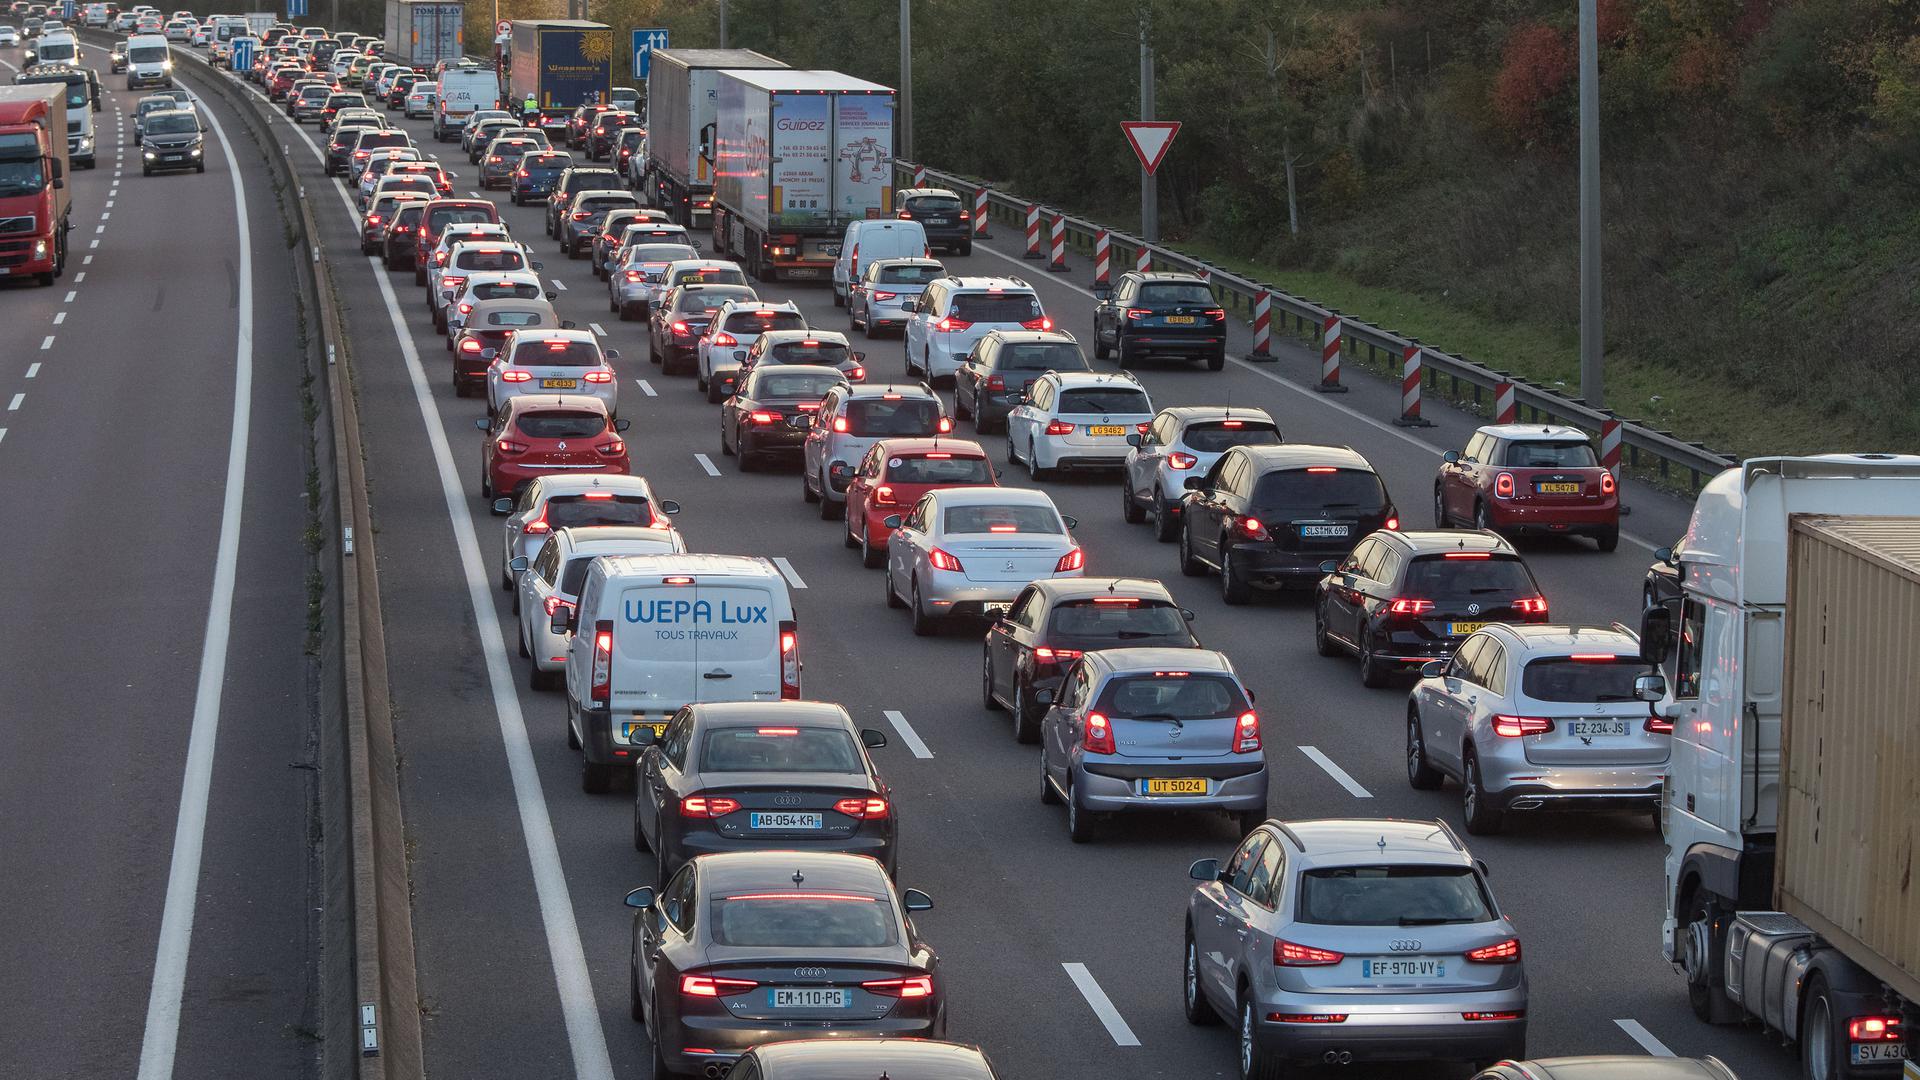 Congestion on the A3 motorway